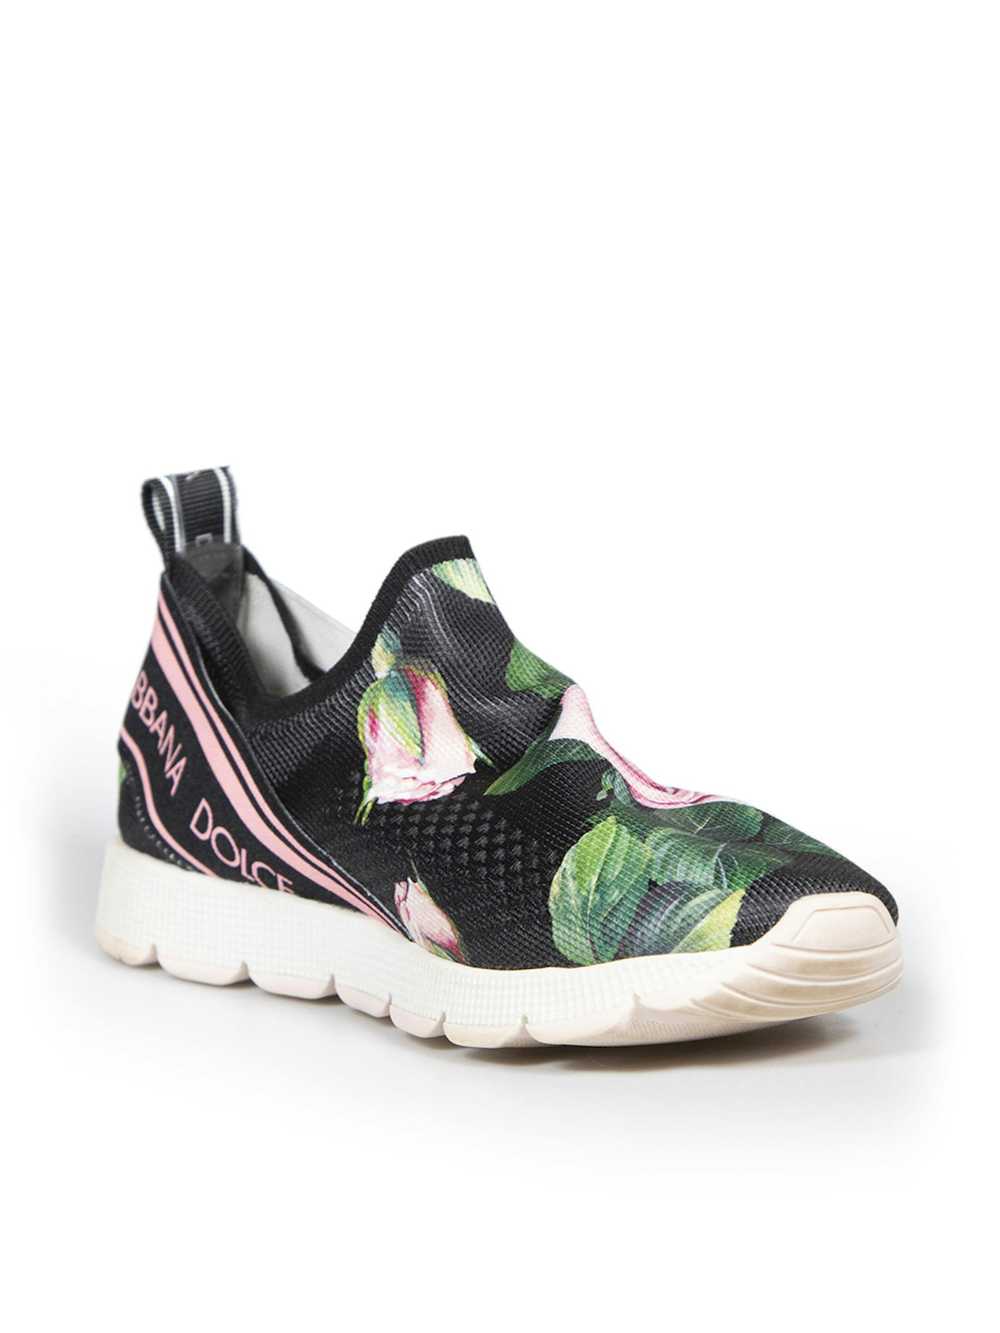 Dolce & Gabbana Tropical Rose Sorrento Trainers - image 2